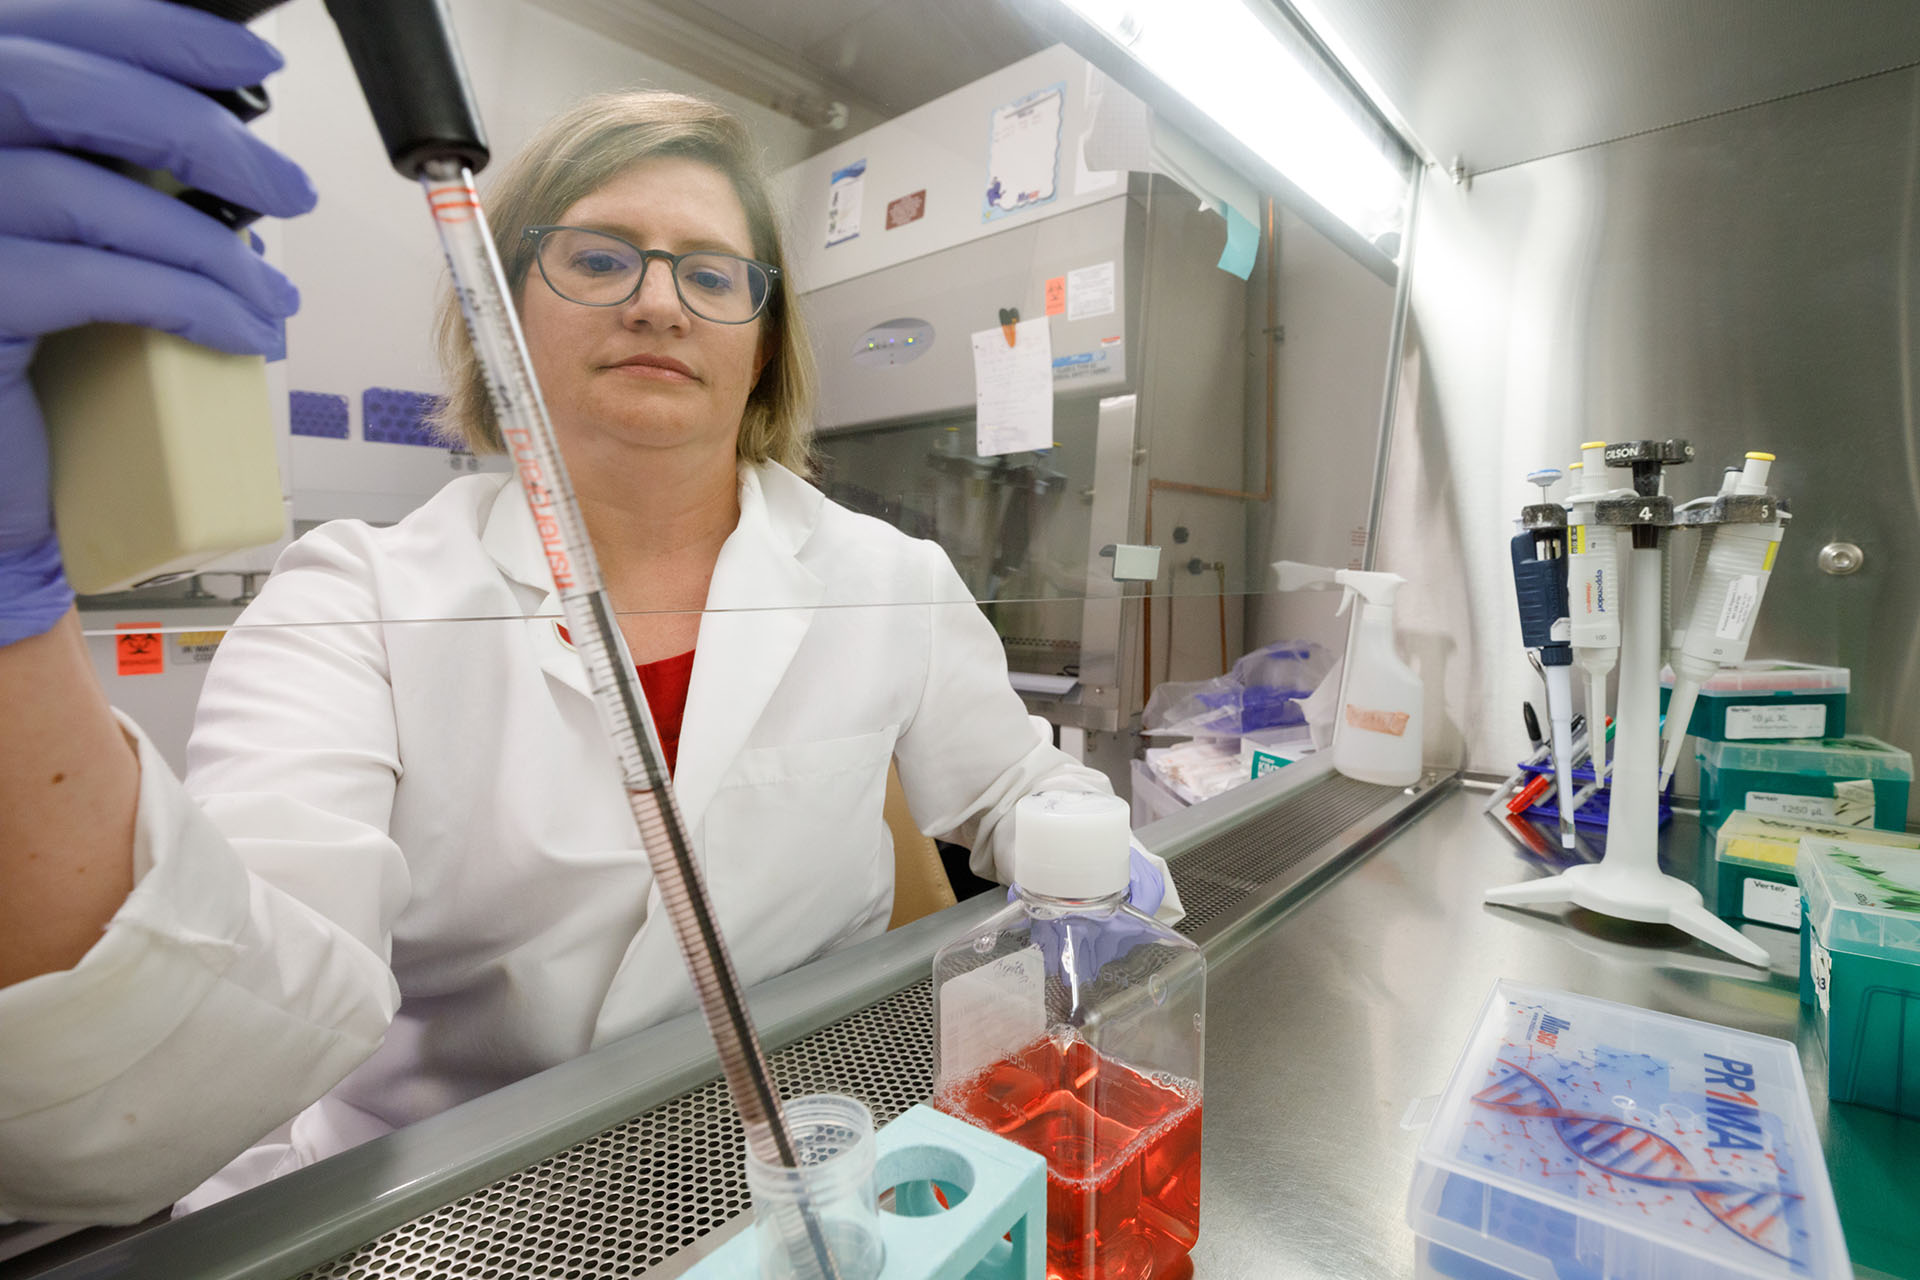 Rebecca Oberley-Deegan&comma; PhD&comma; professor in the UNMC Department of Biochemistry and Molecular Biology&comma; is a fellow with the National Strategic Research Institute at the University of Nebraska&period;